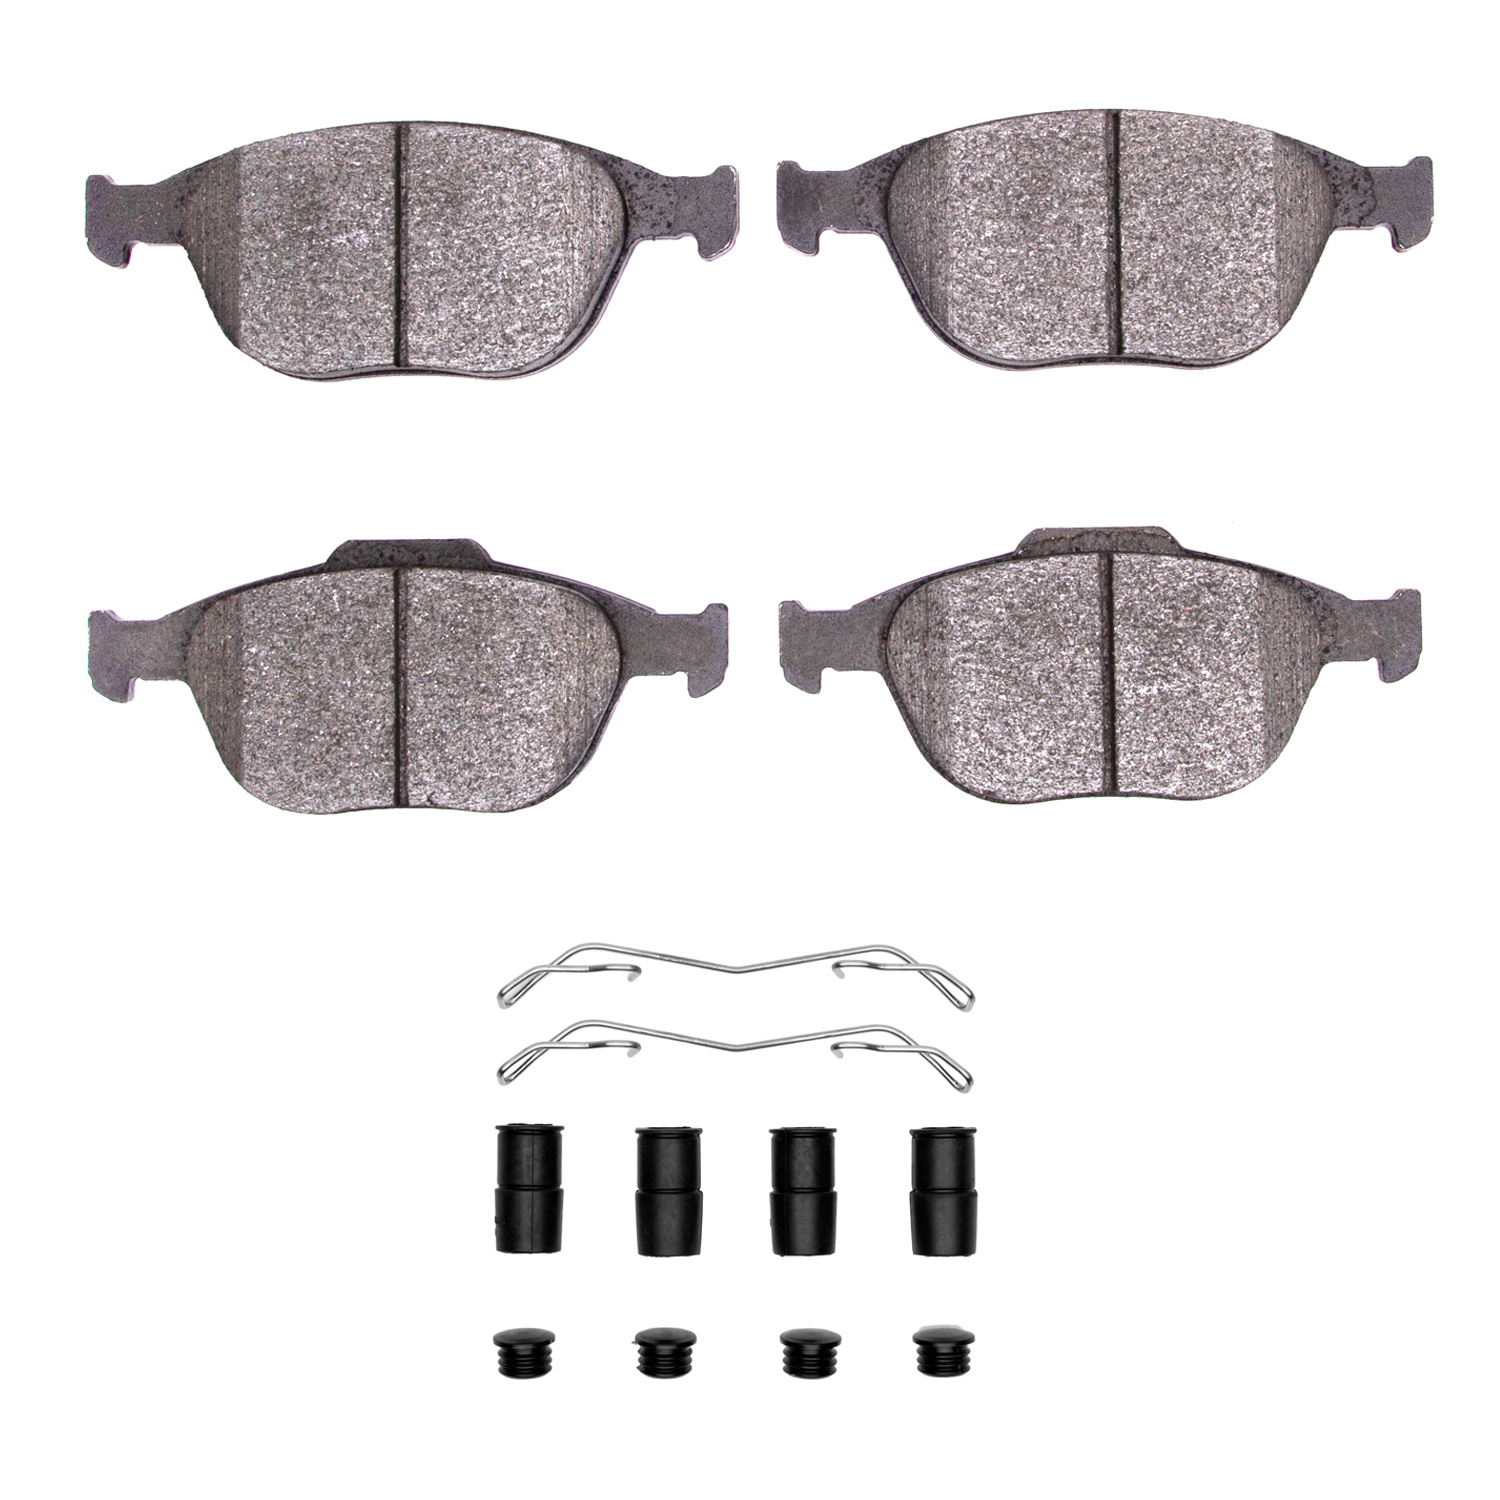 Super-Duty Brake Pads & Hardware Kit, 2002-2013 Ford/Lincoln/Mercury/Mazda, Position: Front